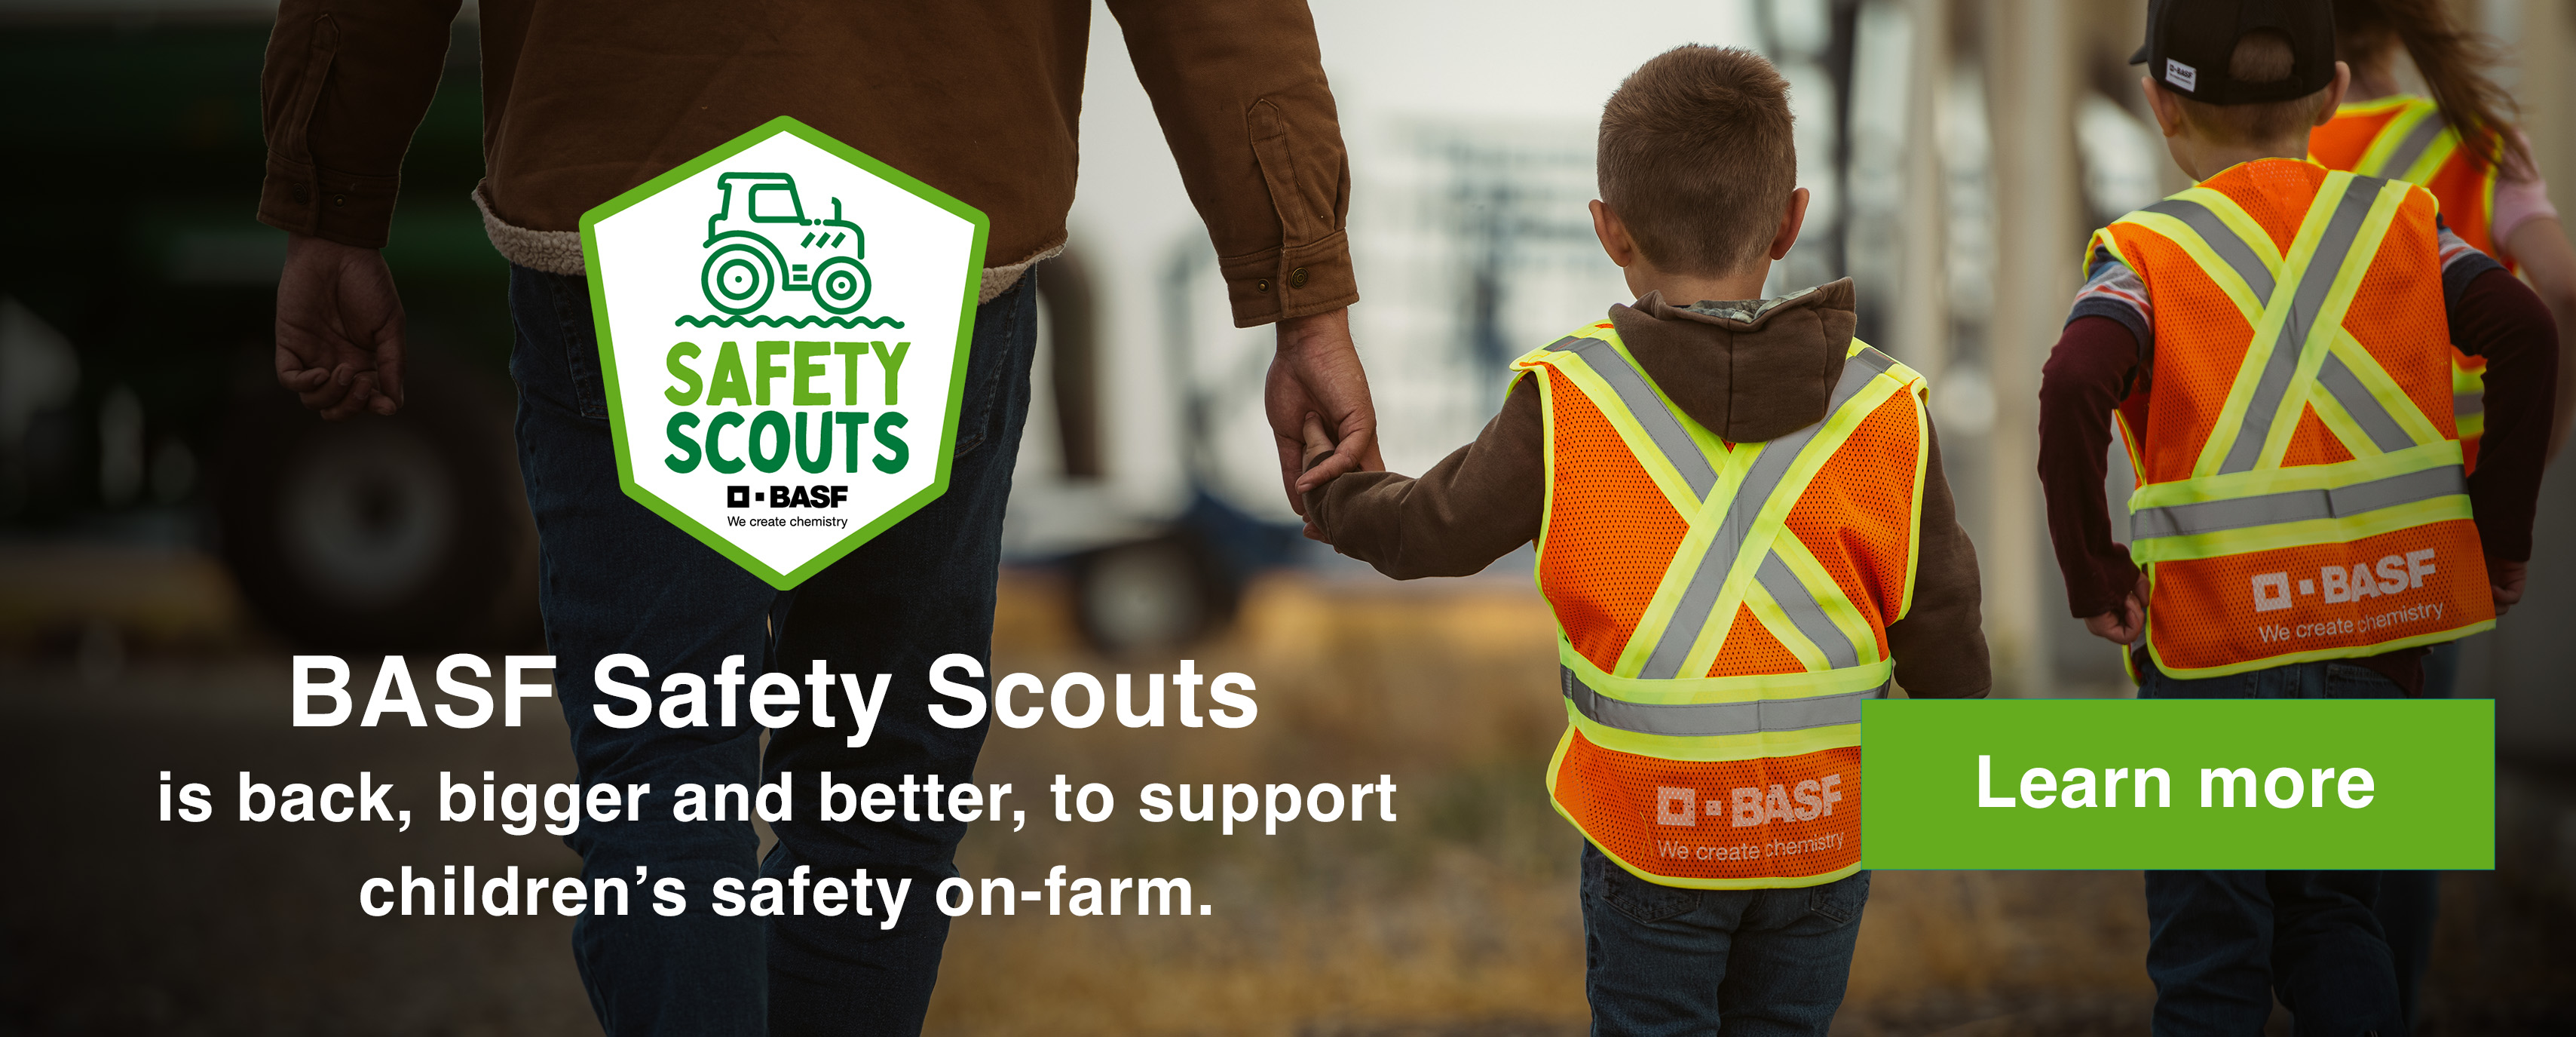 BASF Safety Scouts - Learn more